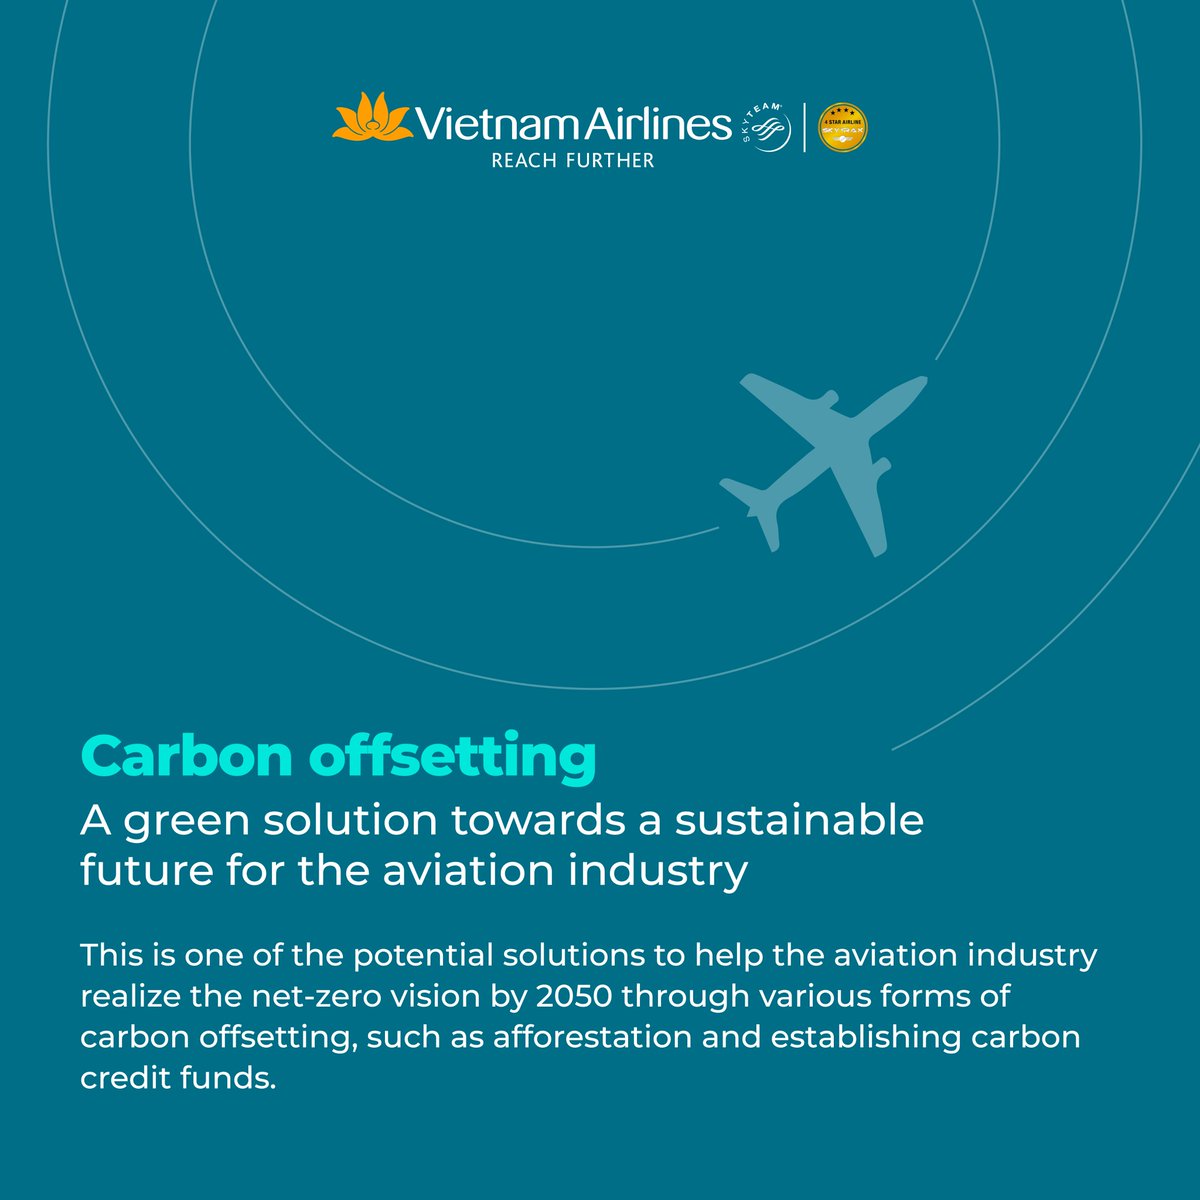 ♻️ Reducing carbon emissions is an ultimate goal for airlines to reach net zero by 2050.  ✈️ We support green initiatives by eliminating nylon wrap for onboard supplies, which cuts down our use of over 60 million nylon bags per year.  #VietnamAirlines